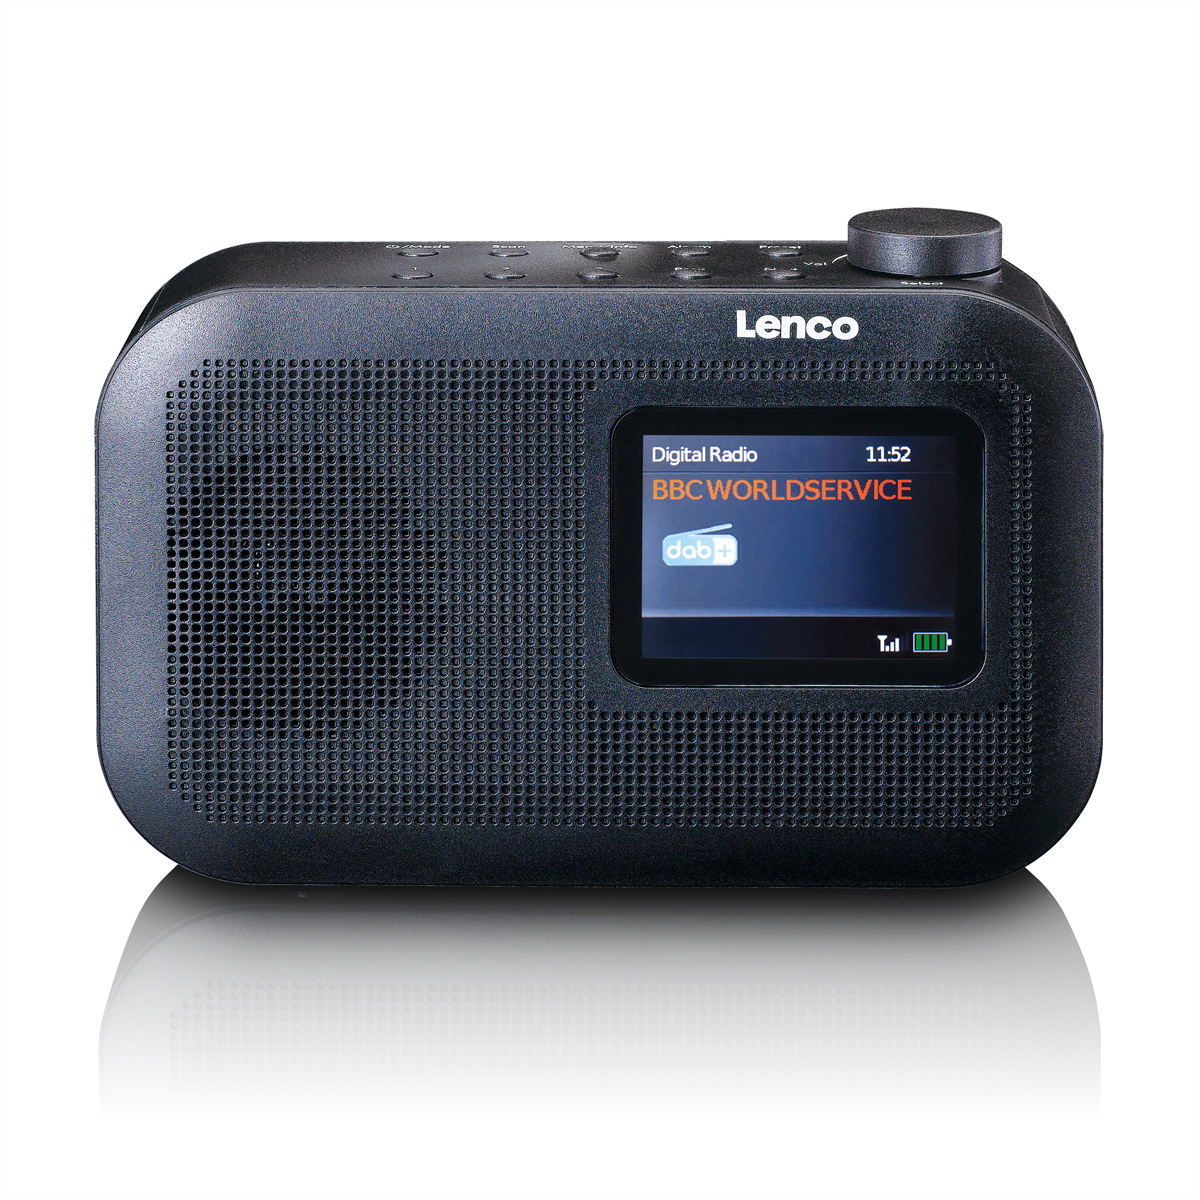 Top Internet/DAB+ Radios - Quality Selection & Best